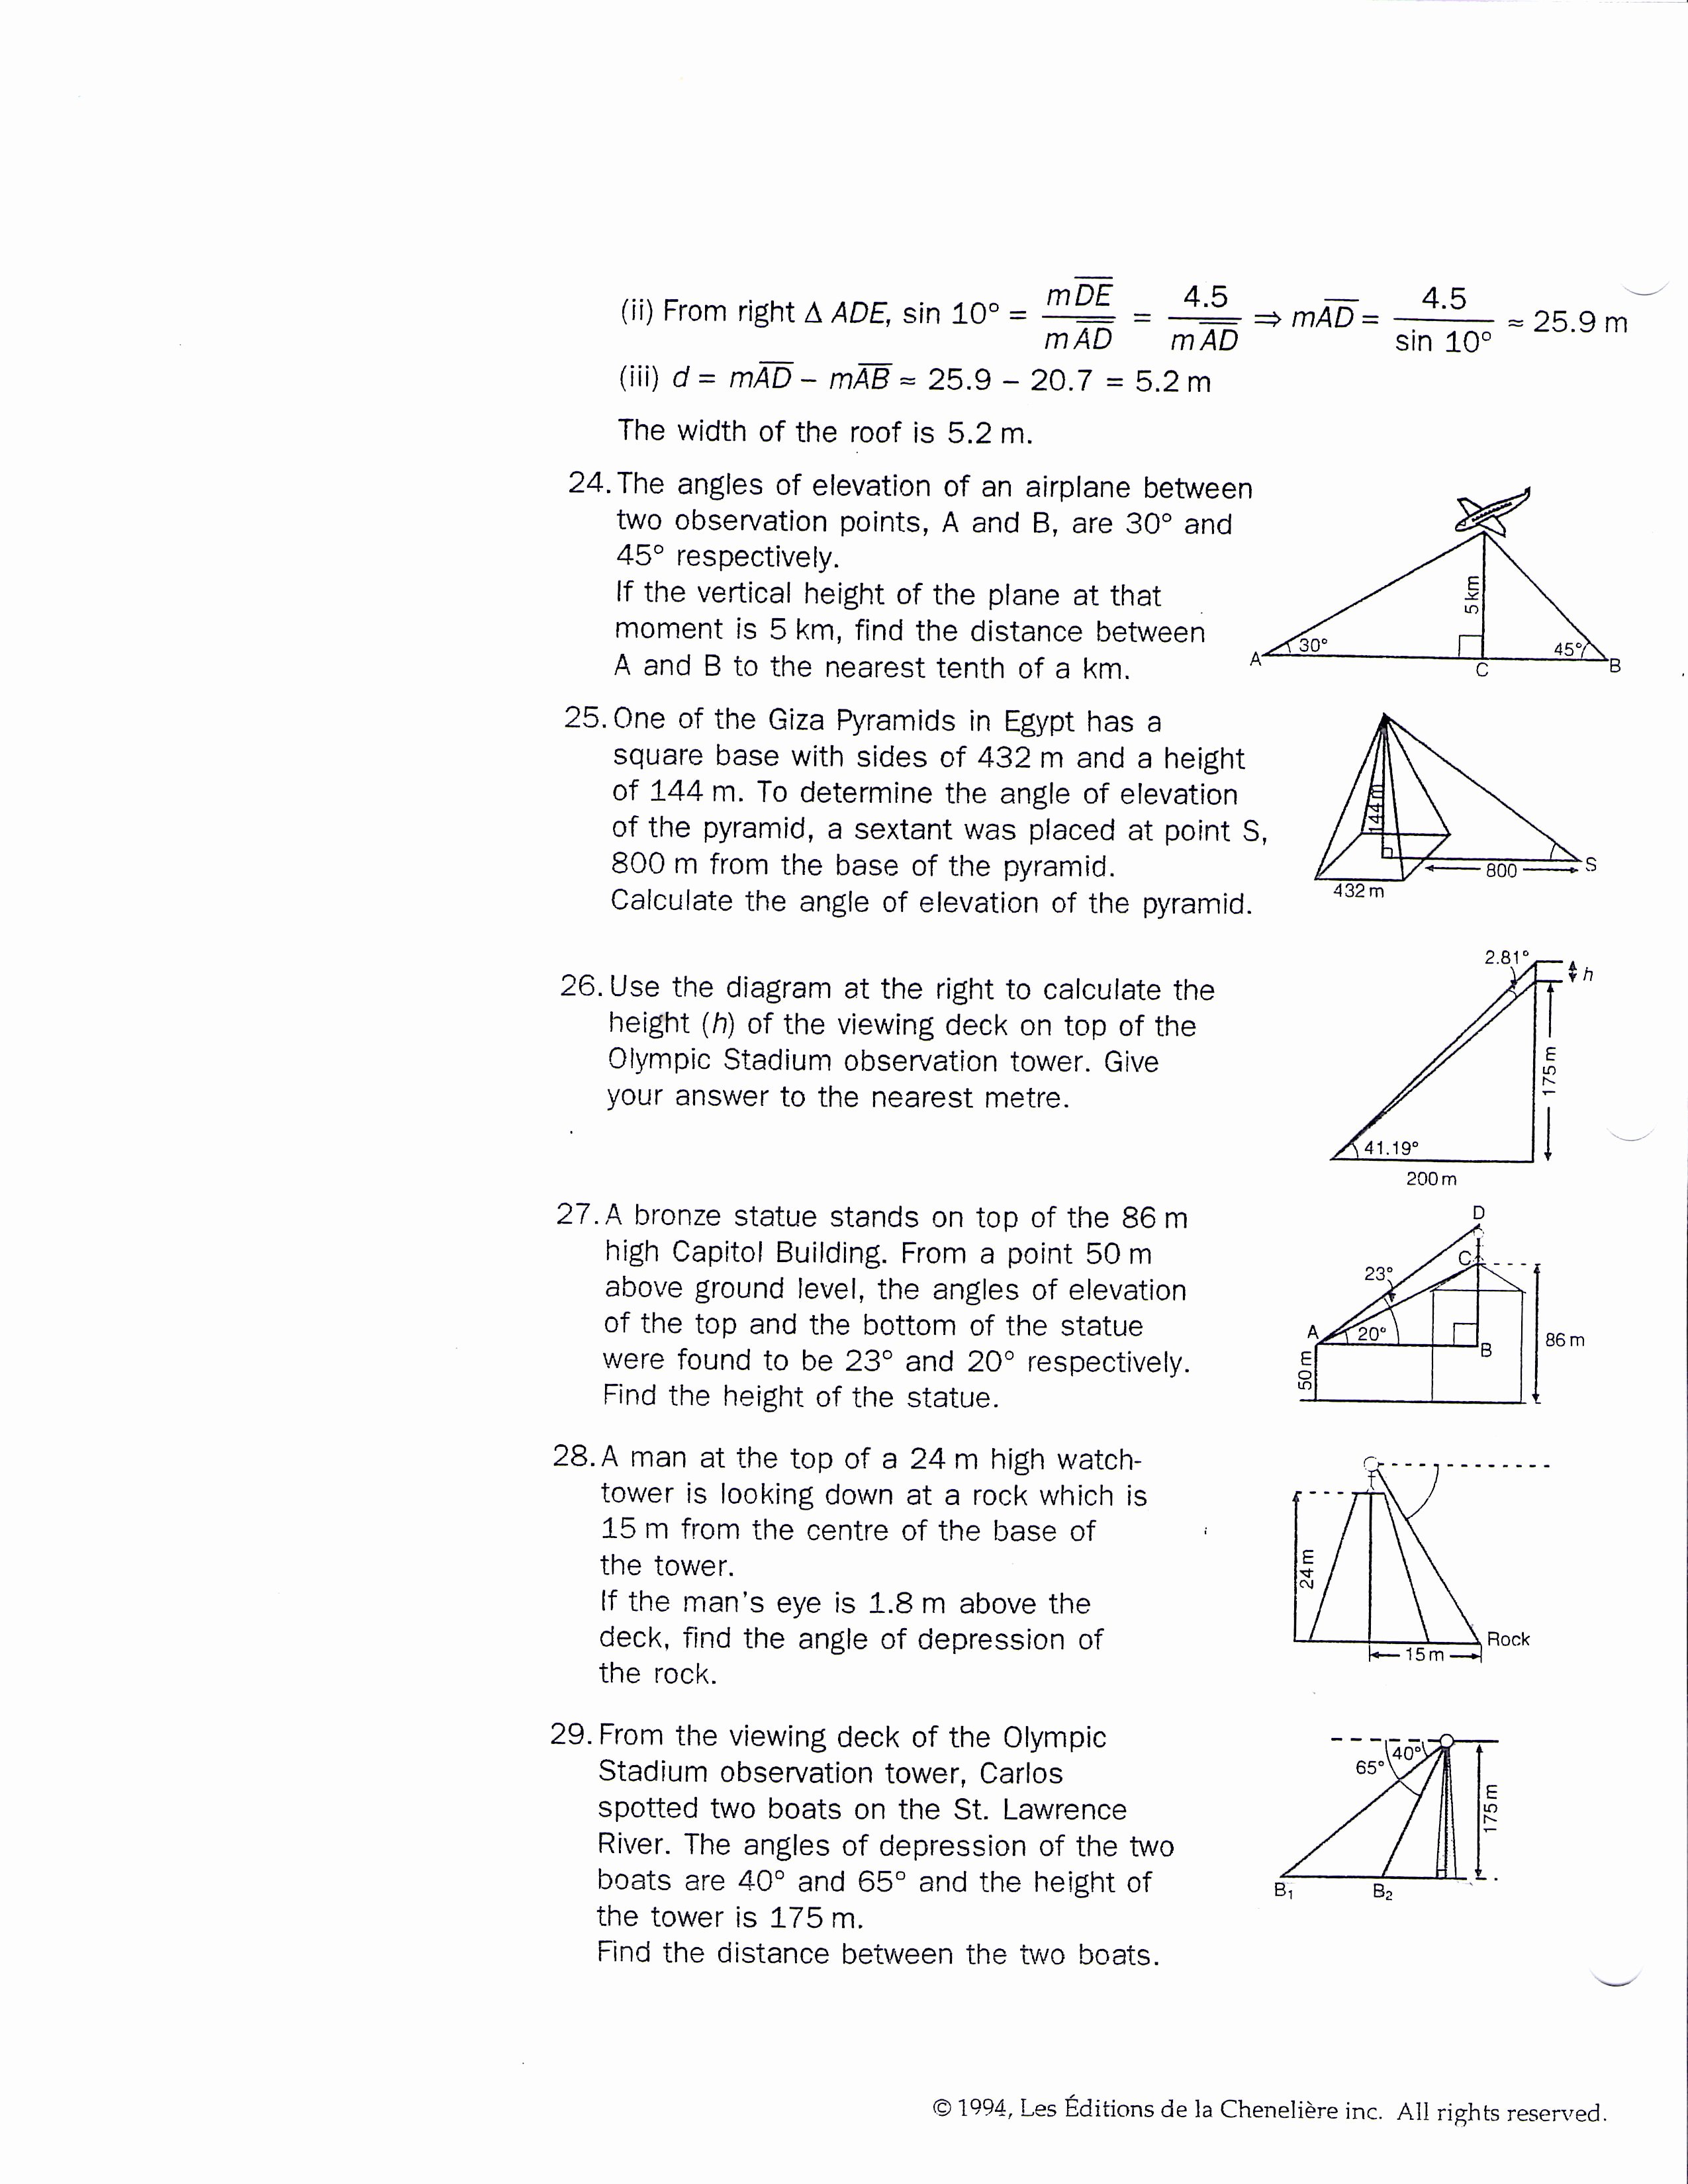 Trigonometry Word Problems Worksheet Answers Beautiful Mrsmartinmath [licensed for Non Mercial Use Only